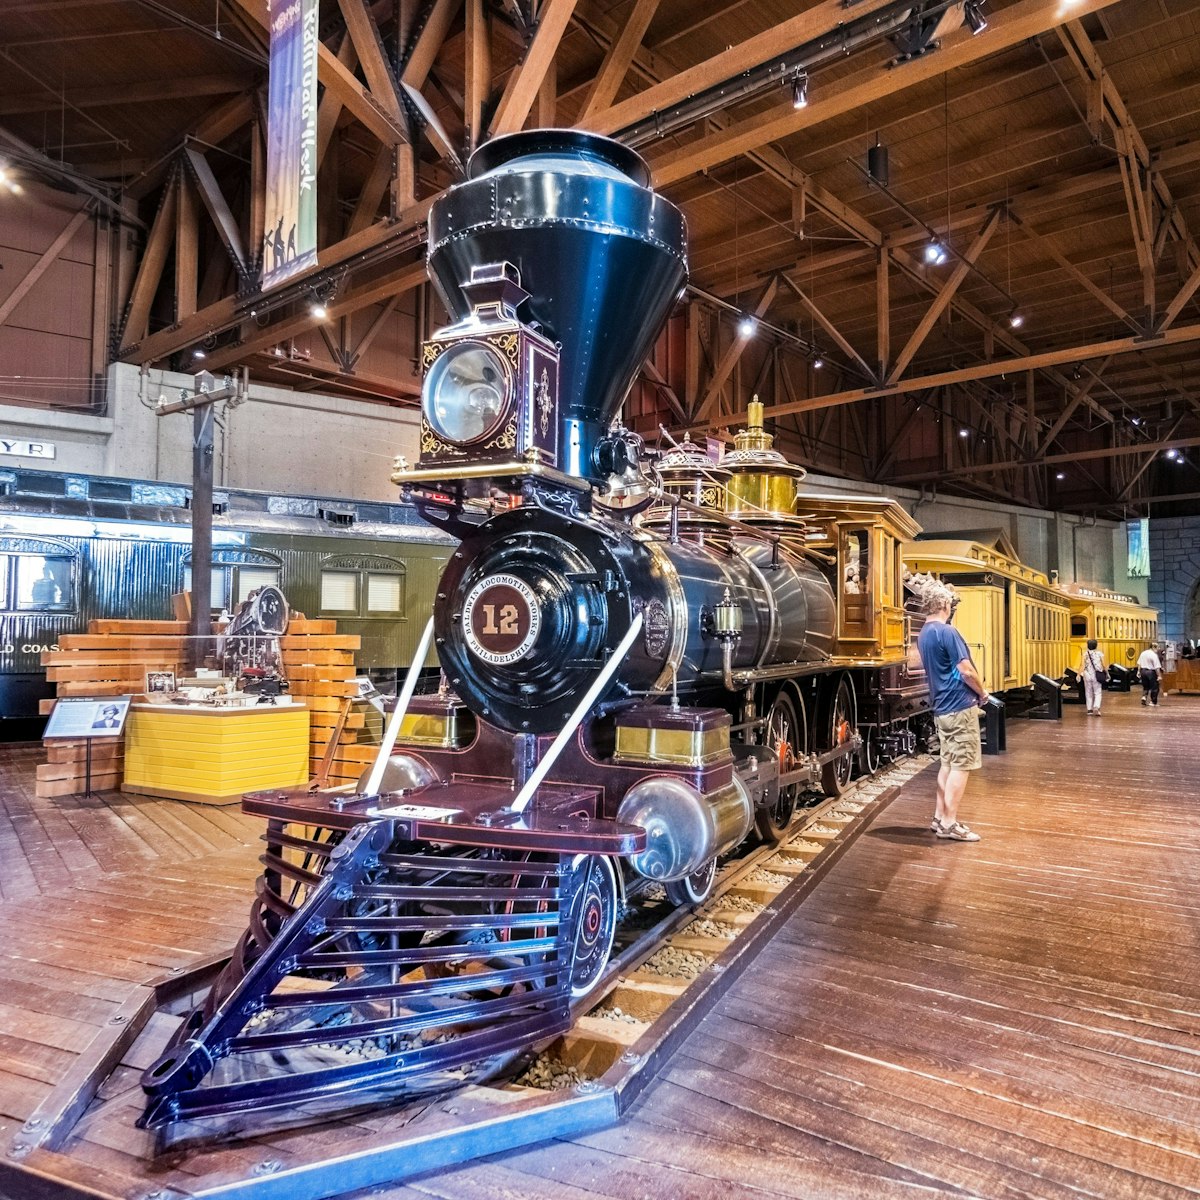 September 22, 2018 Sacramento / CA / USA - Historic locomotive displayed at the California State Railroad Museum; Shutterstock ID 1188452086; your: Bridget Brown; gl: 65050; netsuite: Online Editorial; full: POI Image Update